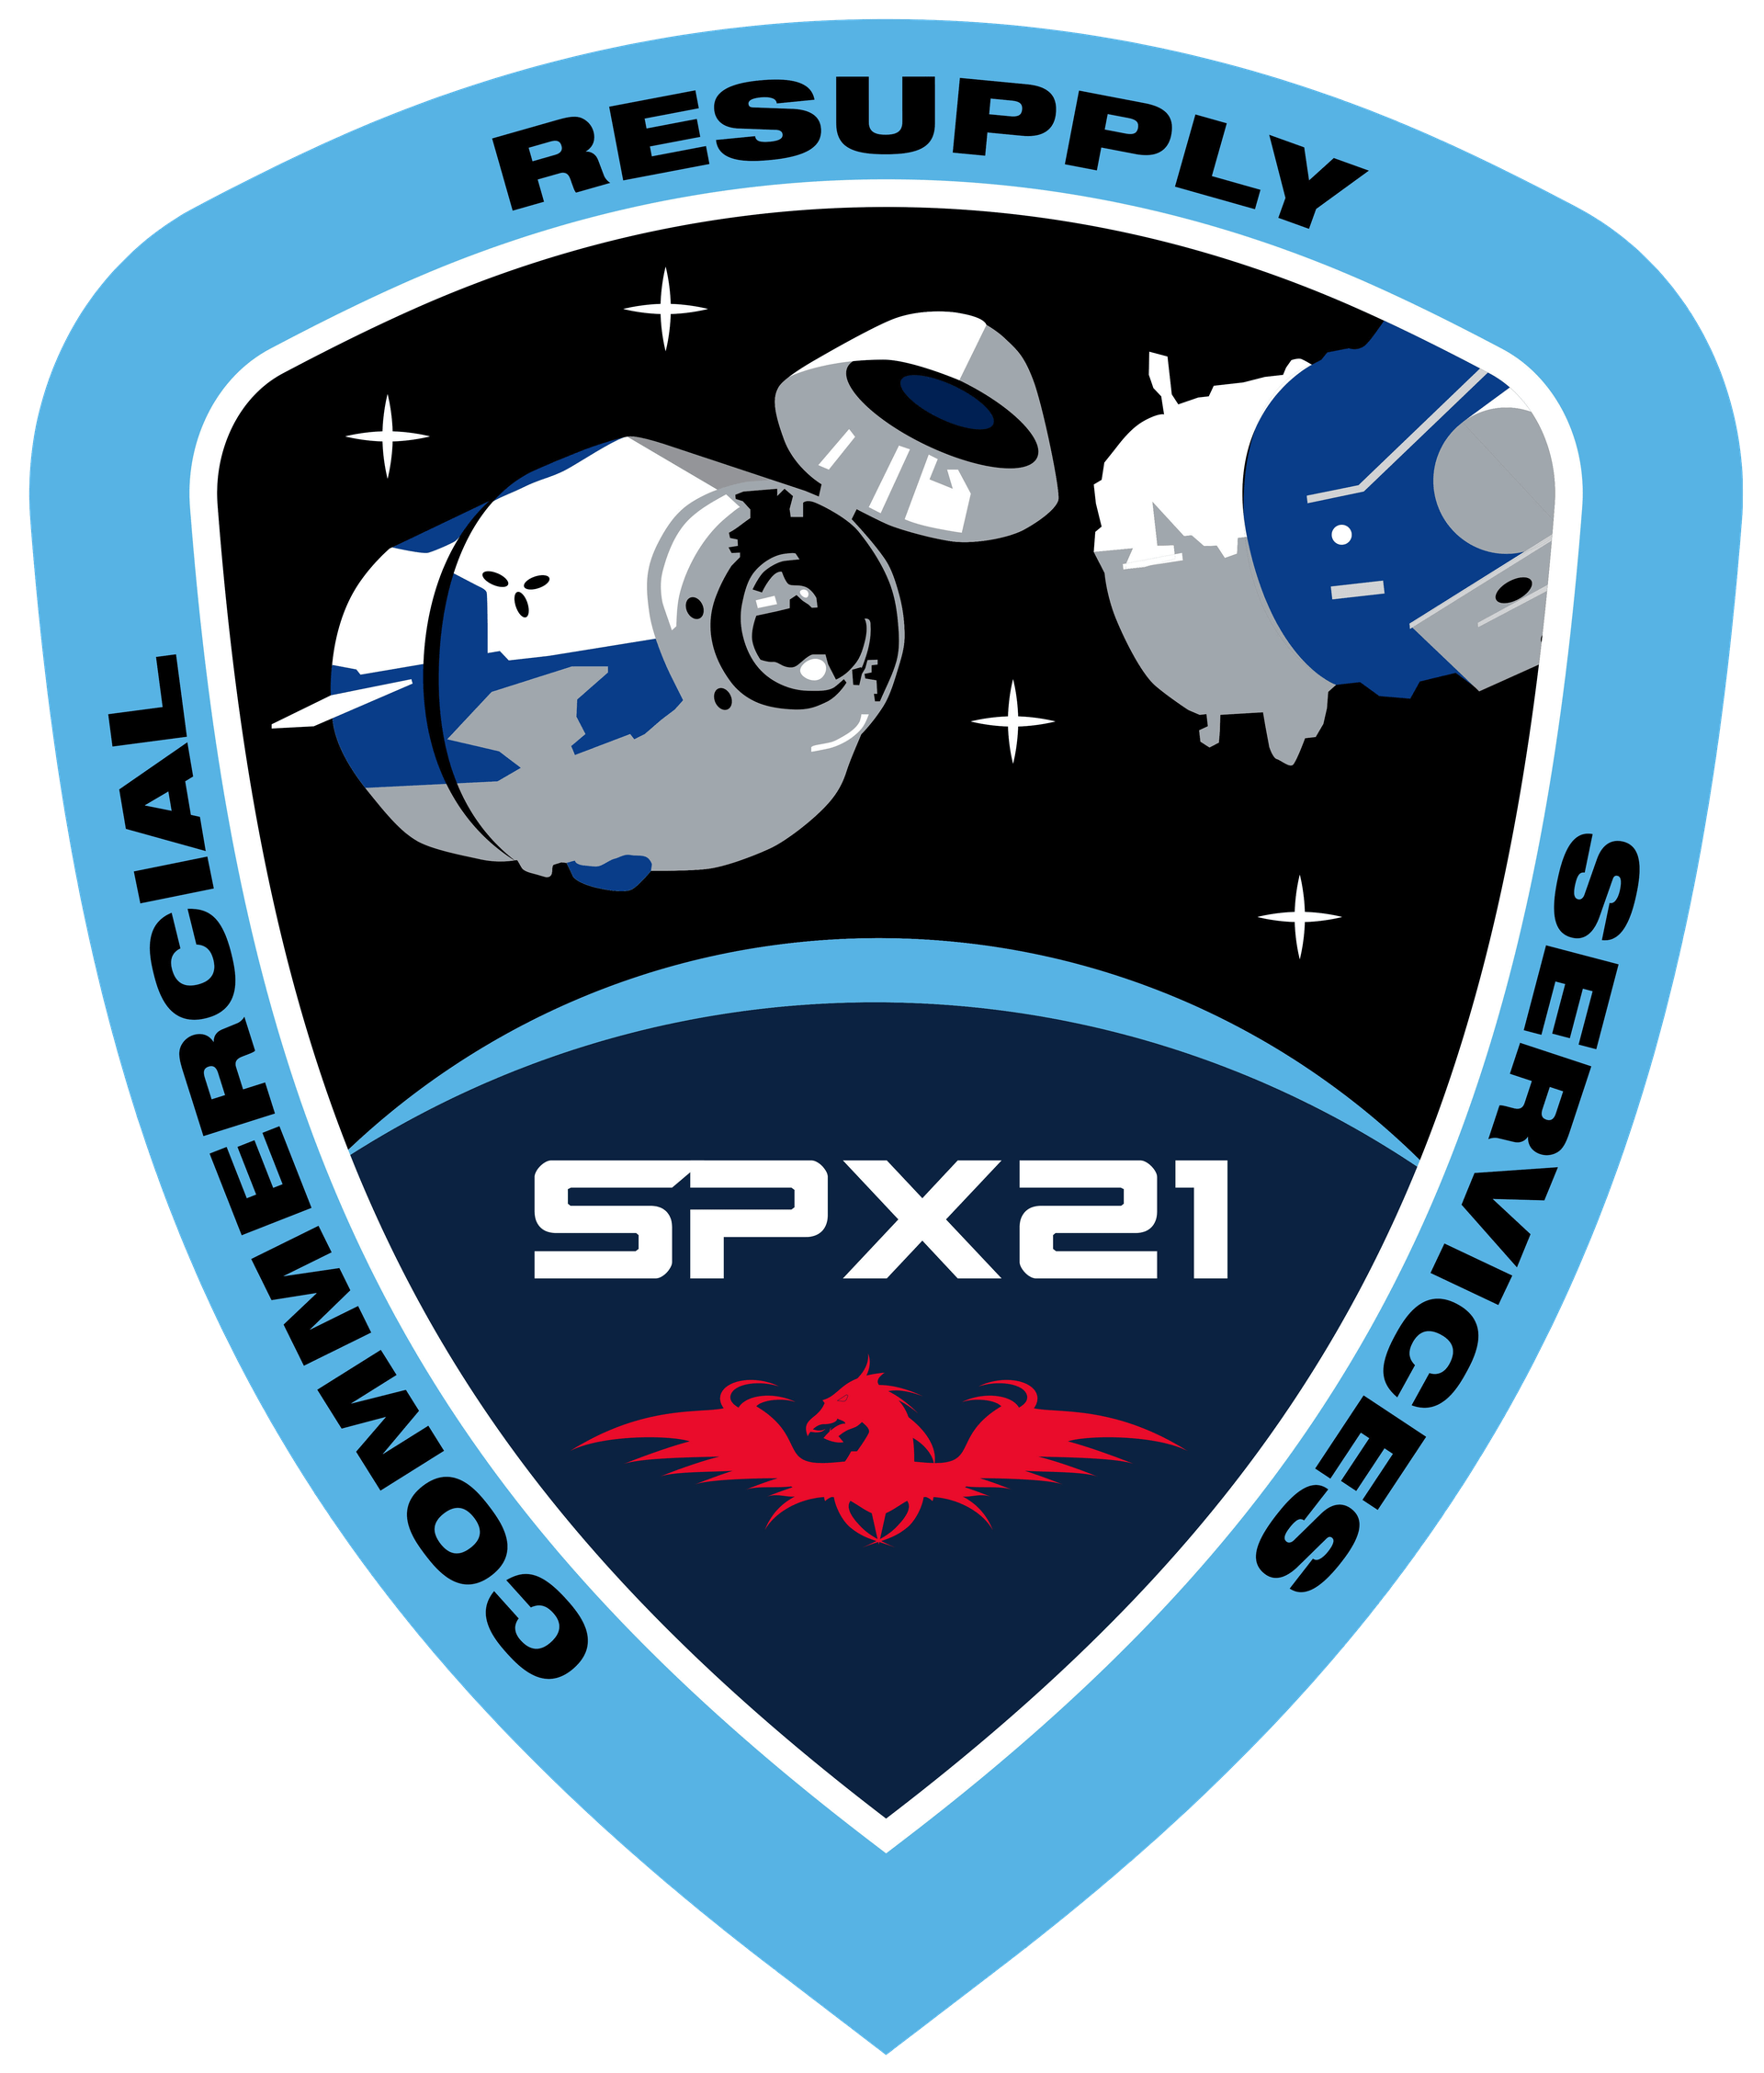 Mission patch for Dragon CRS-2 SpX-21